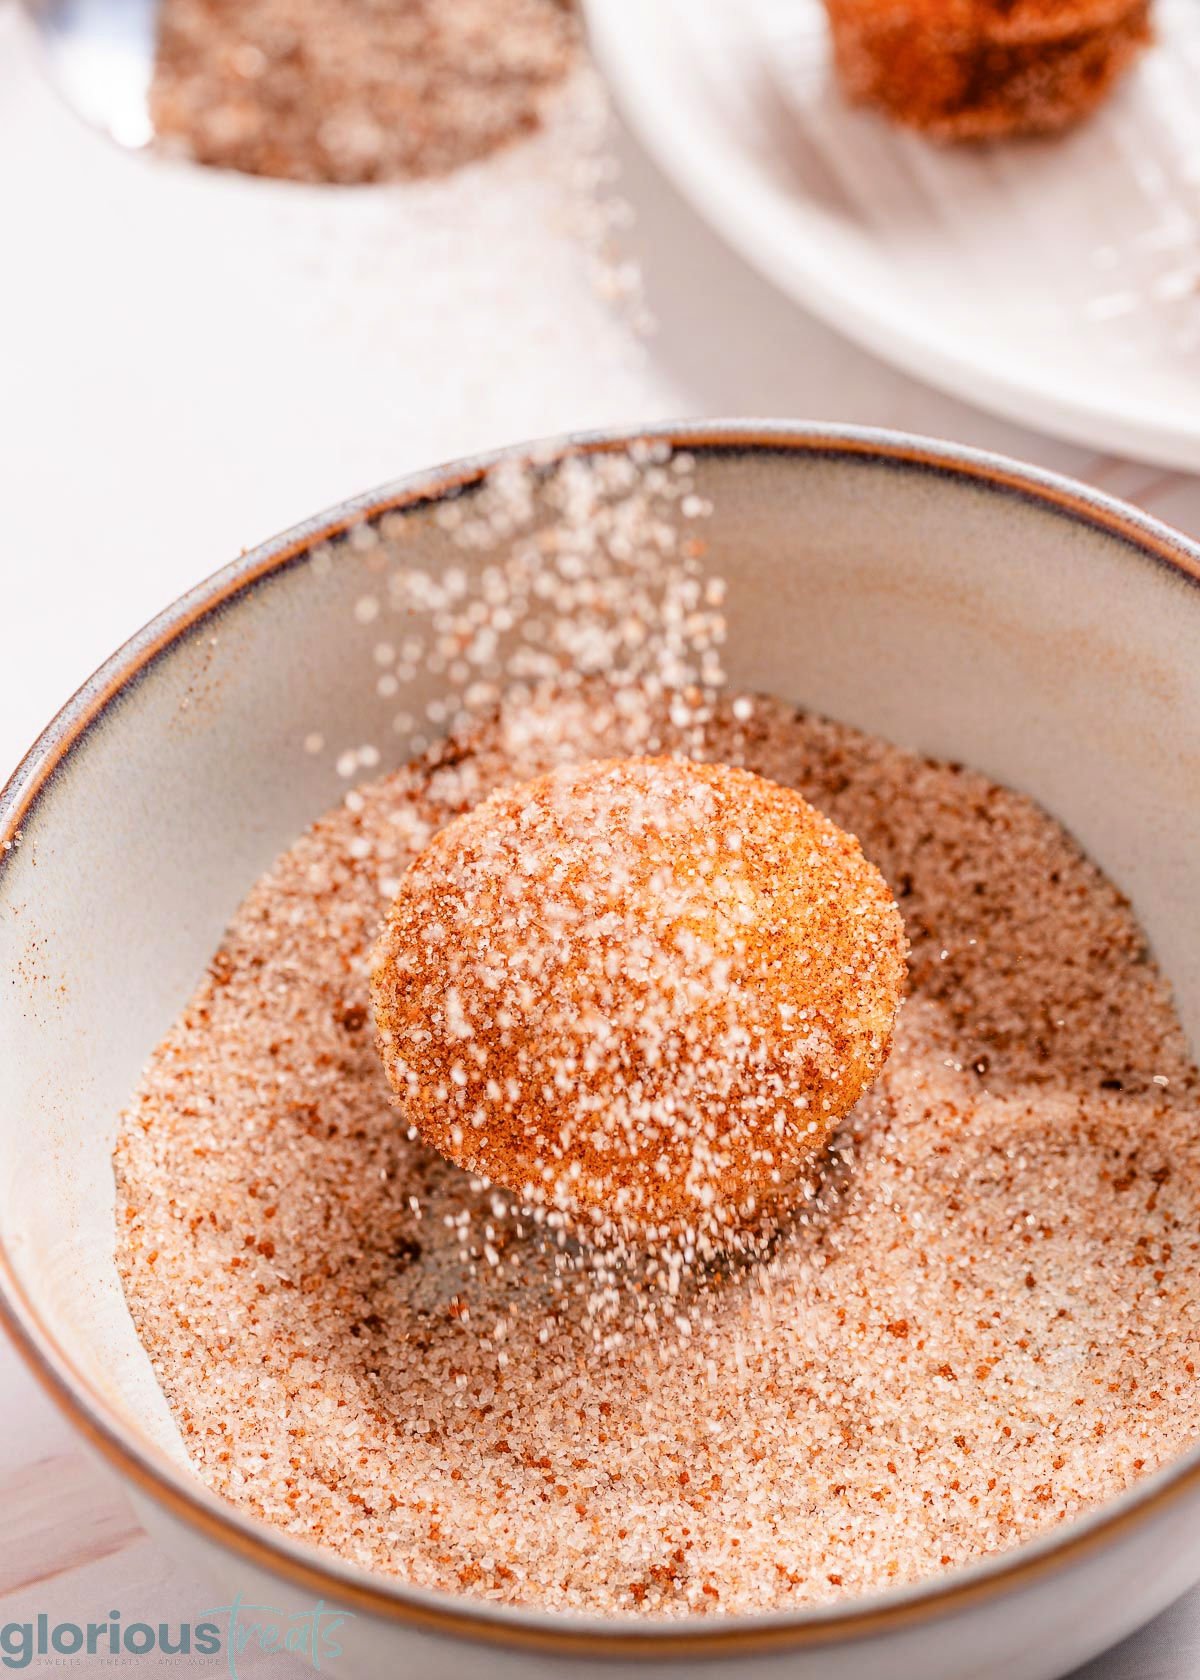 muffin in a bowl being tossed with cinnamon and sugar.